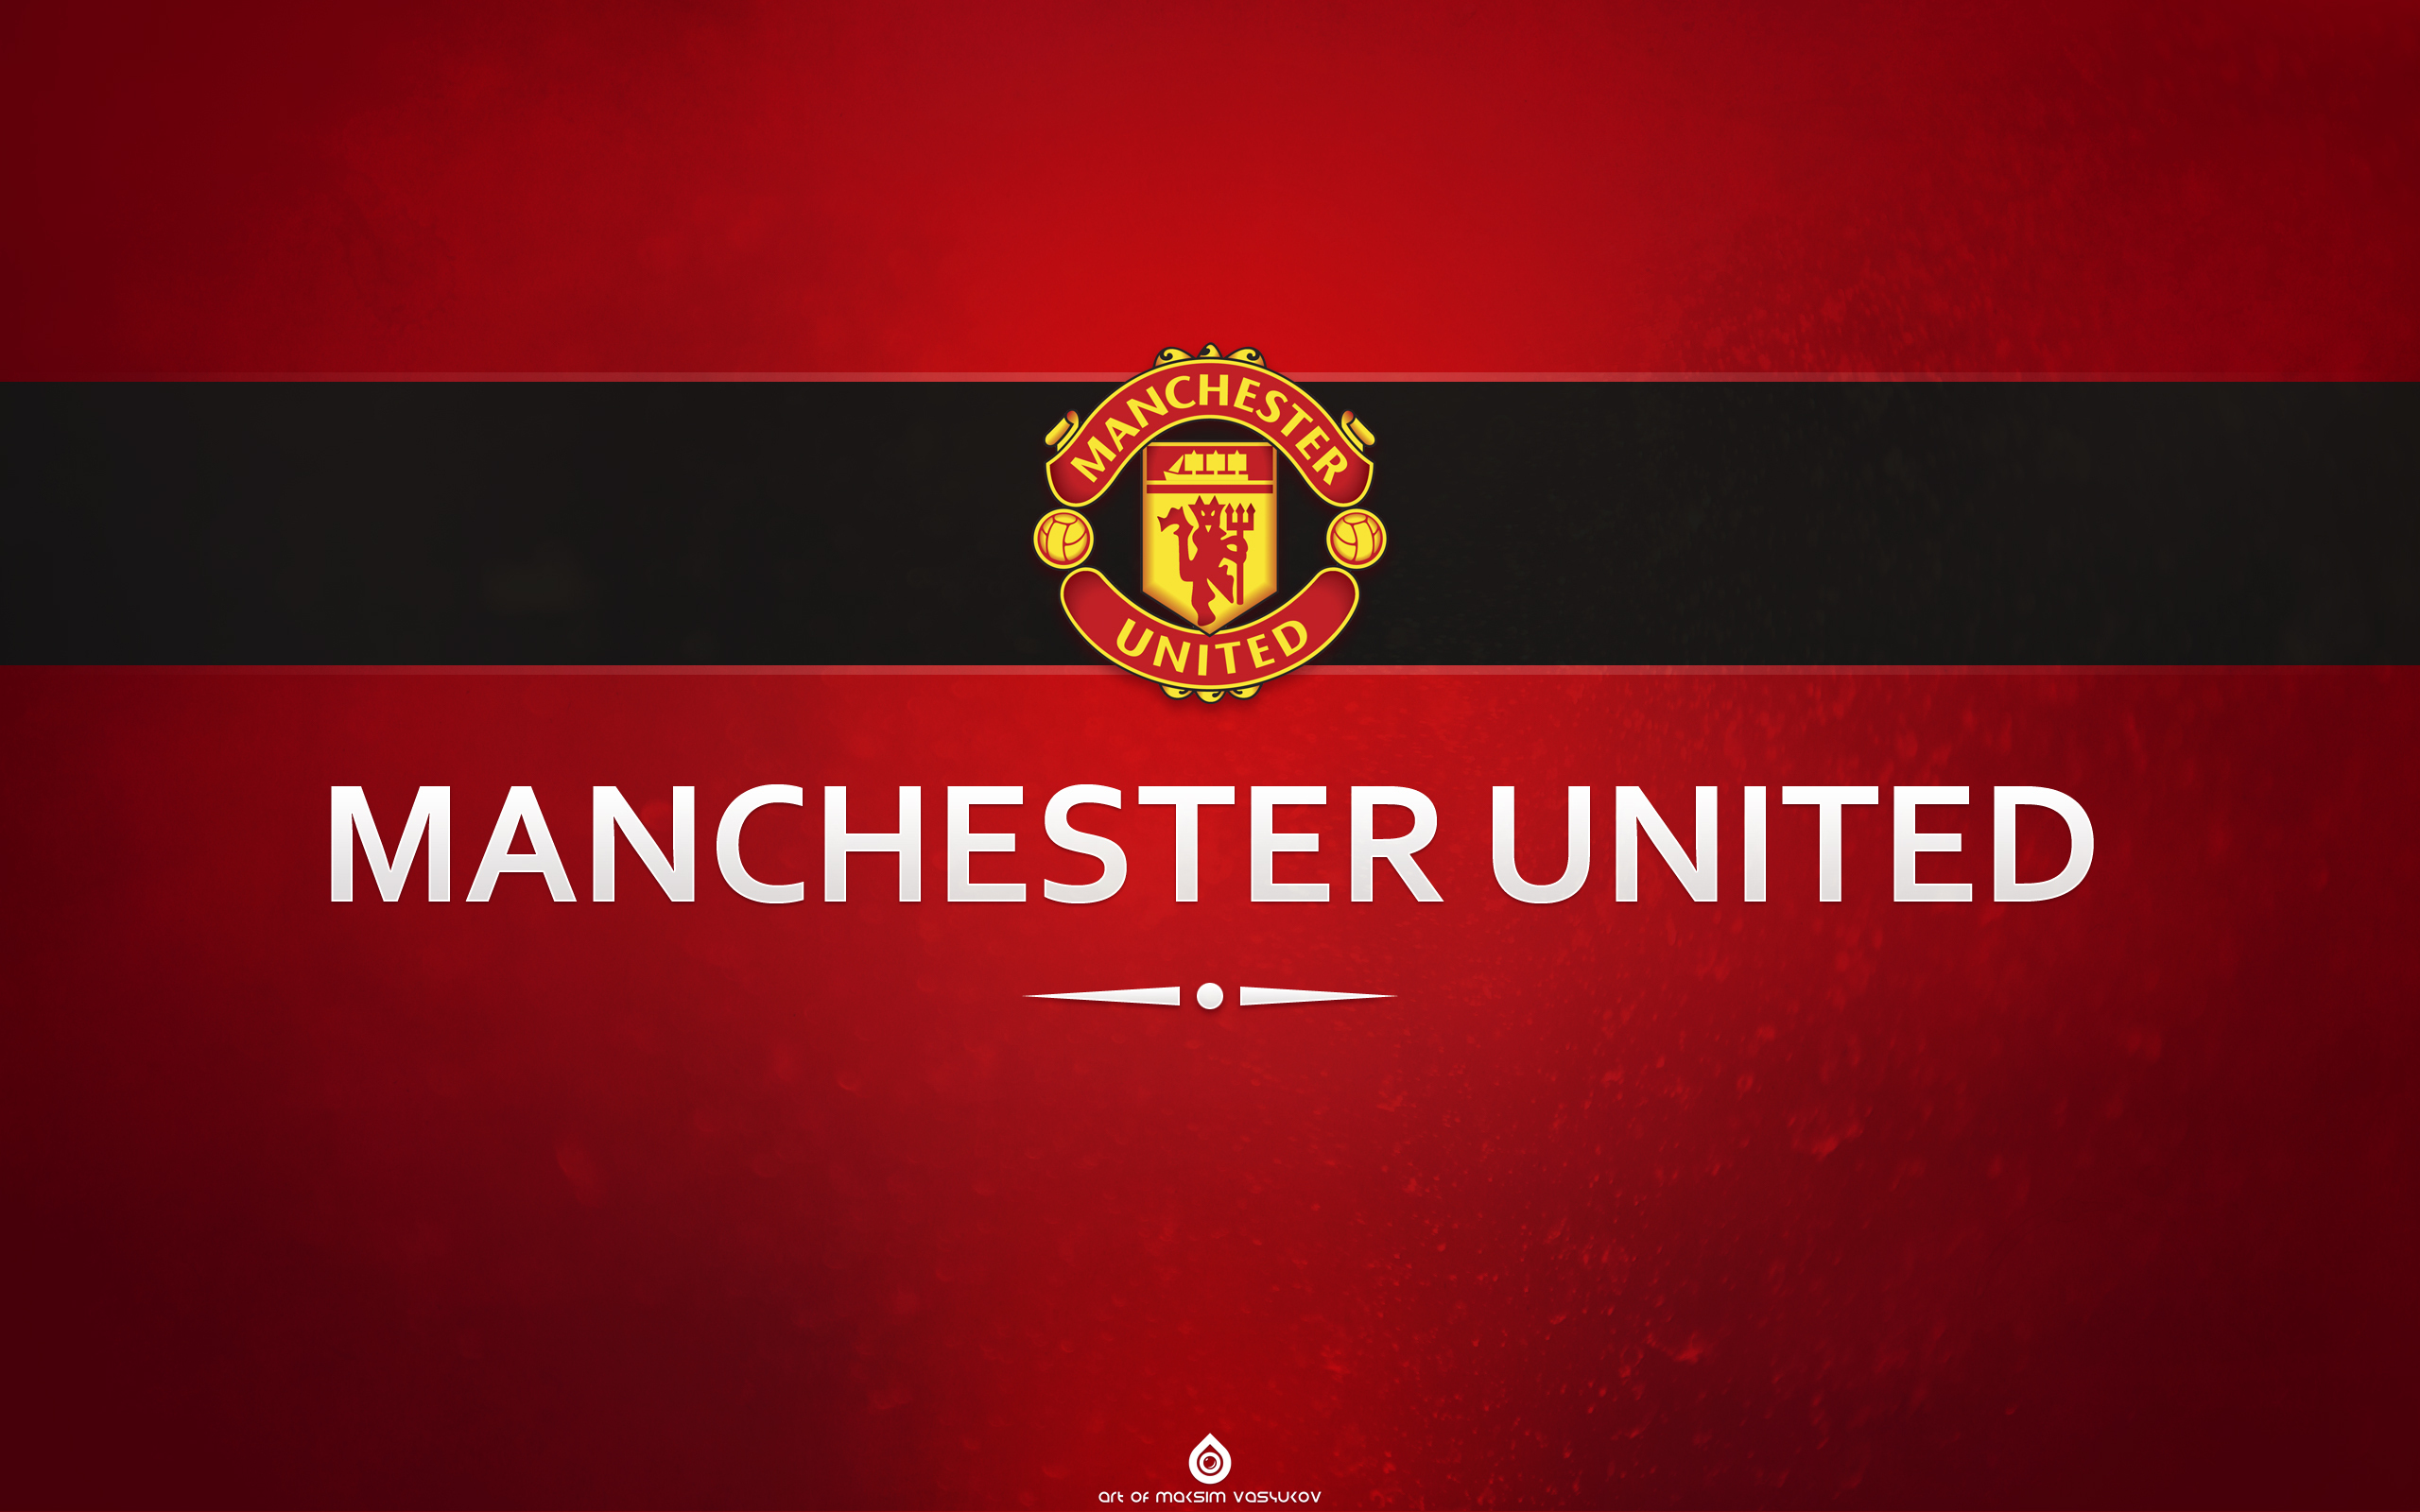 Manchester United Images Icons Wallpapers and Photos on